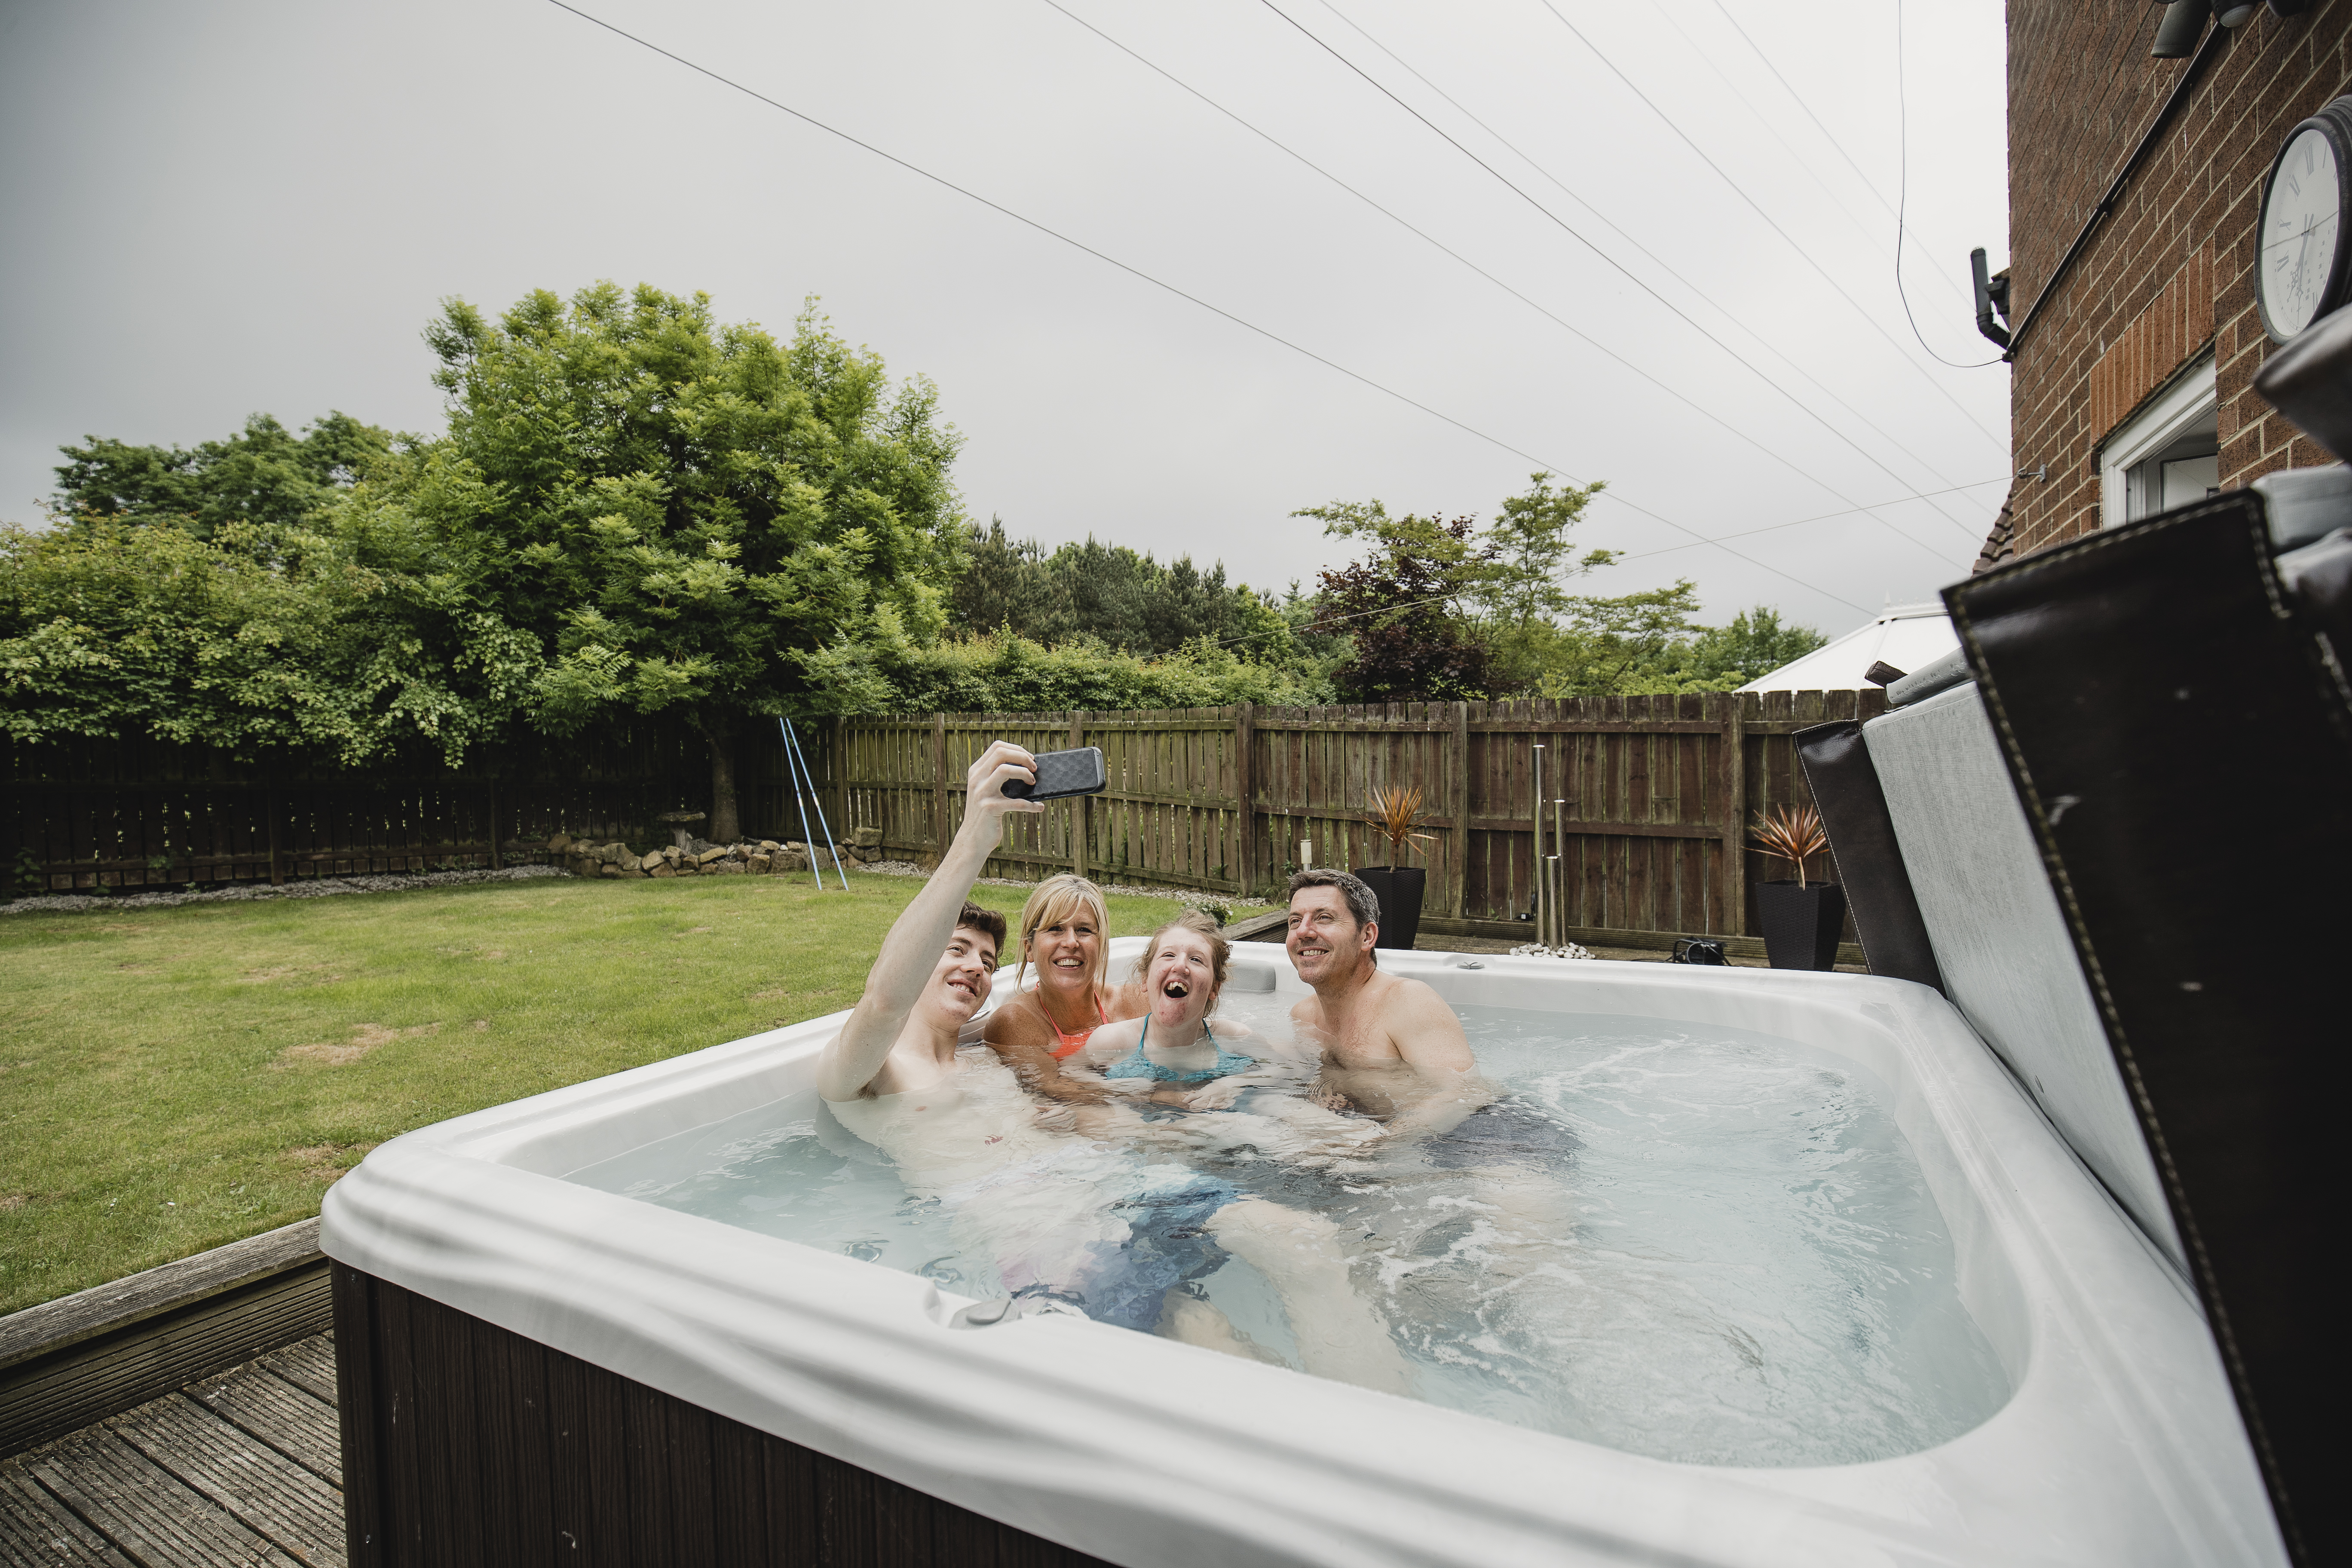 Parkdean Resorts has plenty of availability for hot tub stays this spring and early summer, with prices starting from £24pp a night